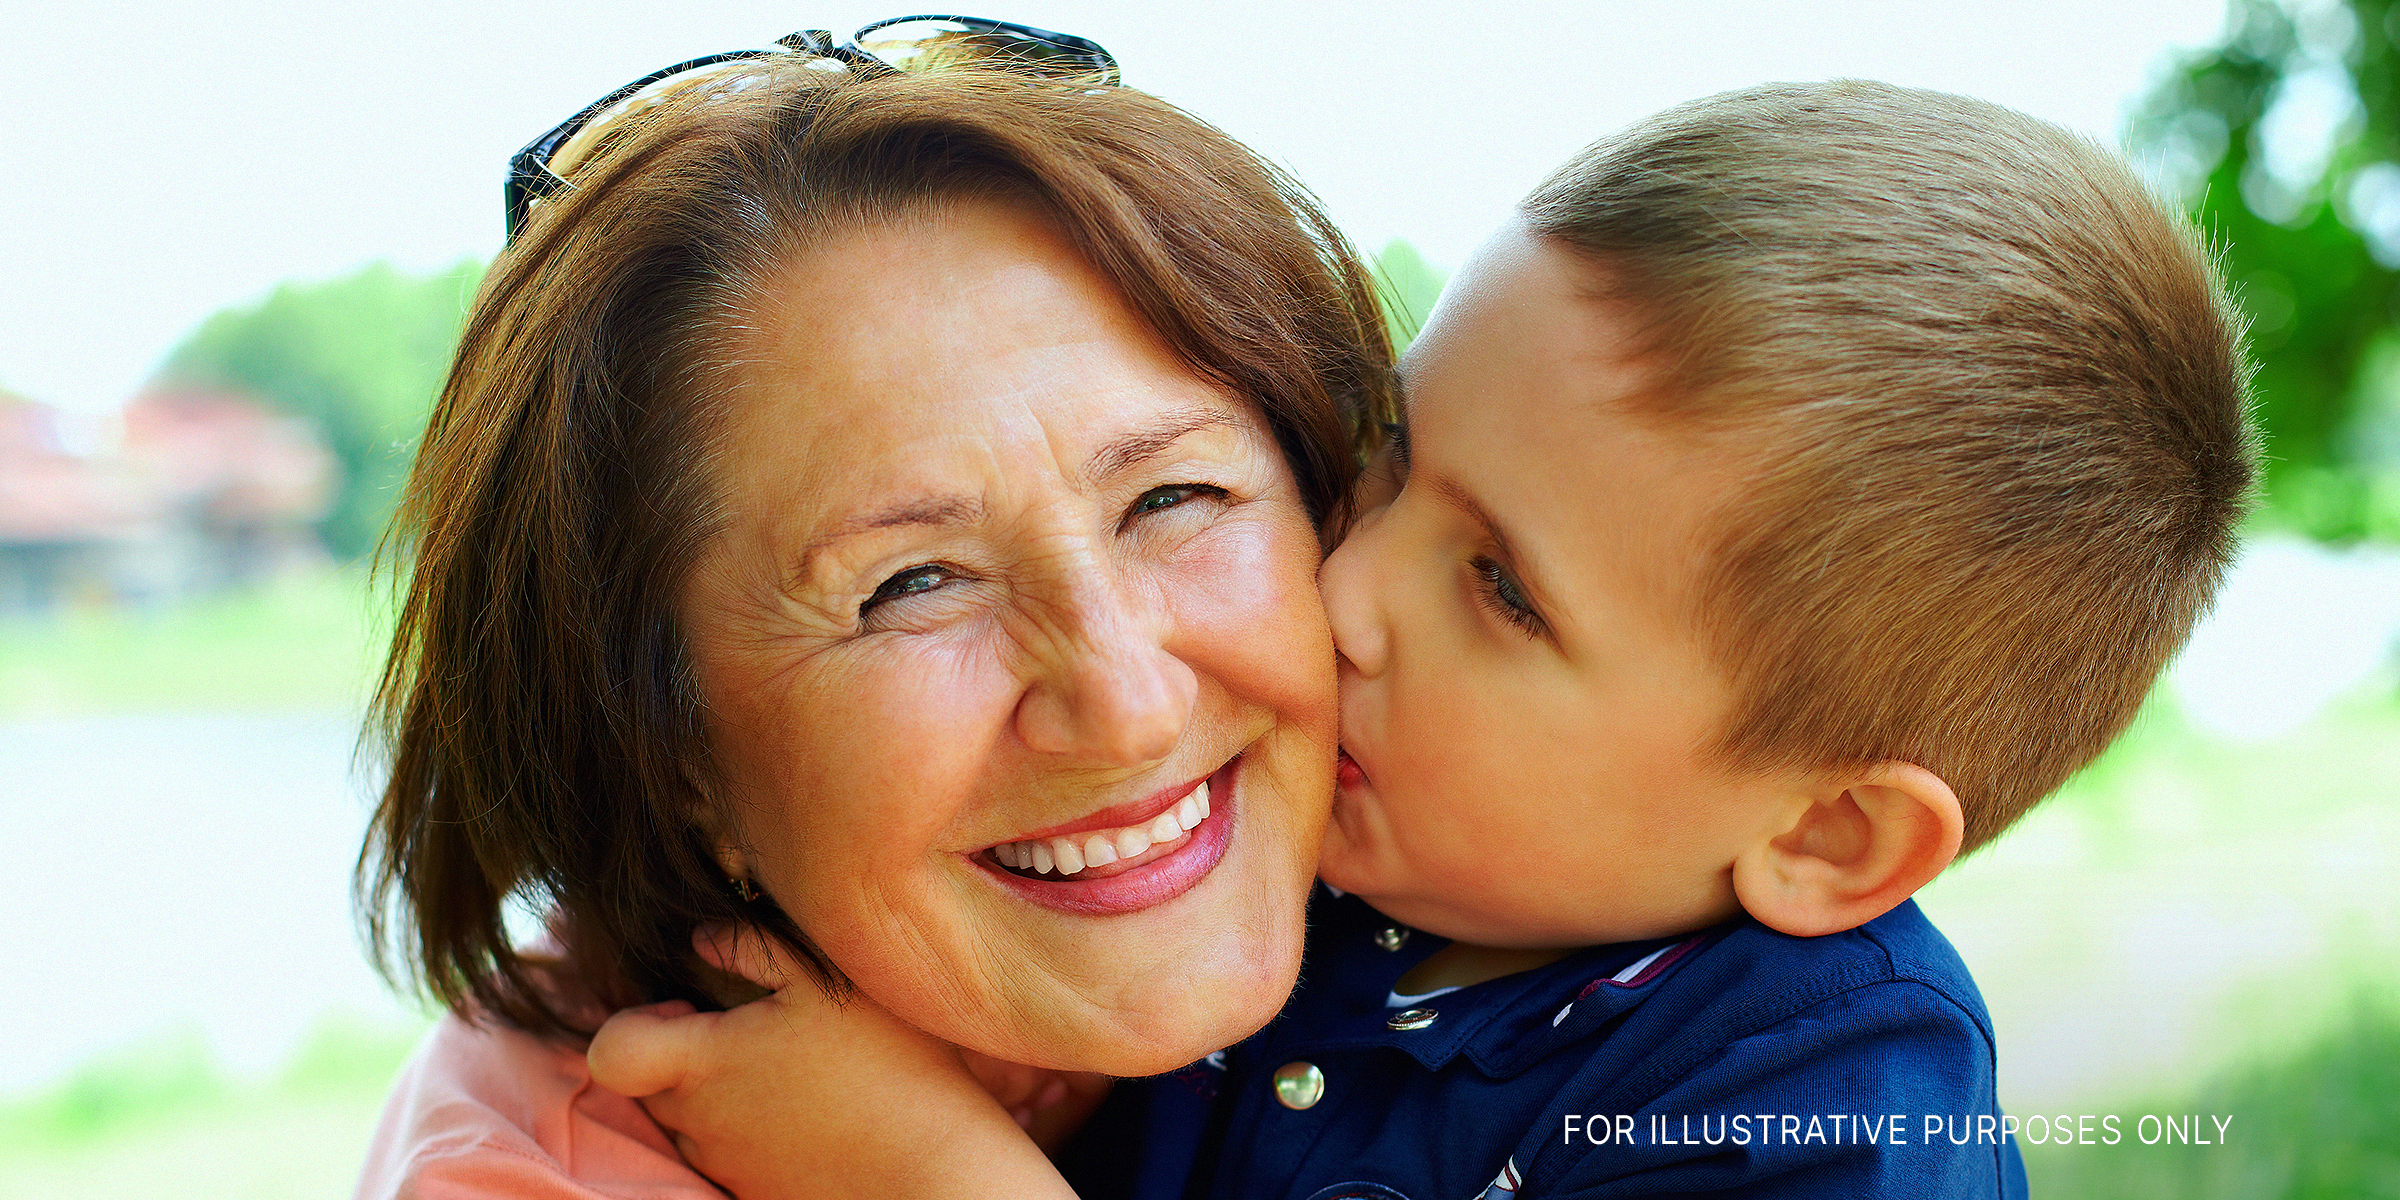 Boy kissing his grandmother on the cheek | Source: Shutterstock